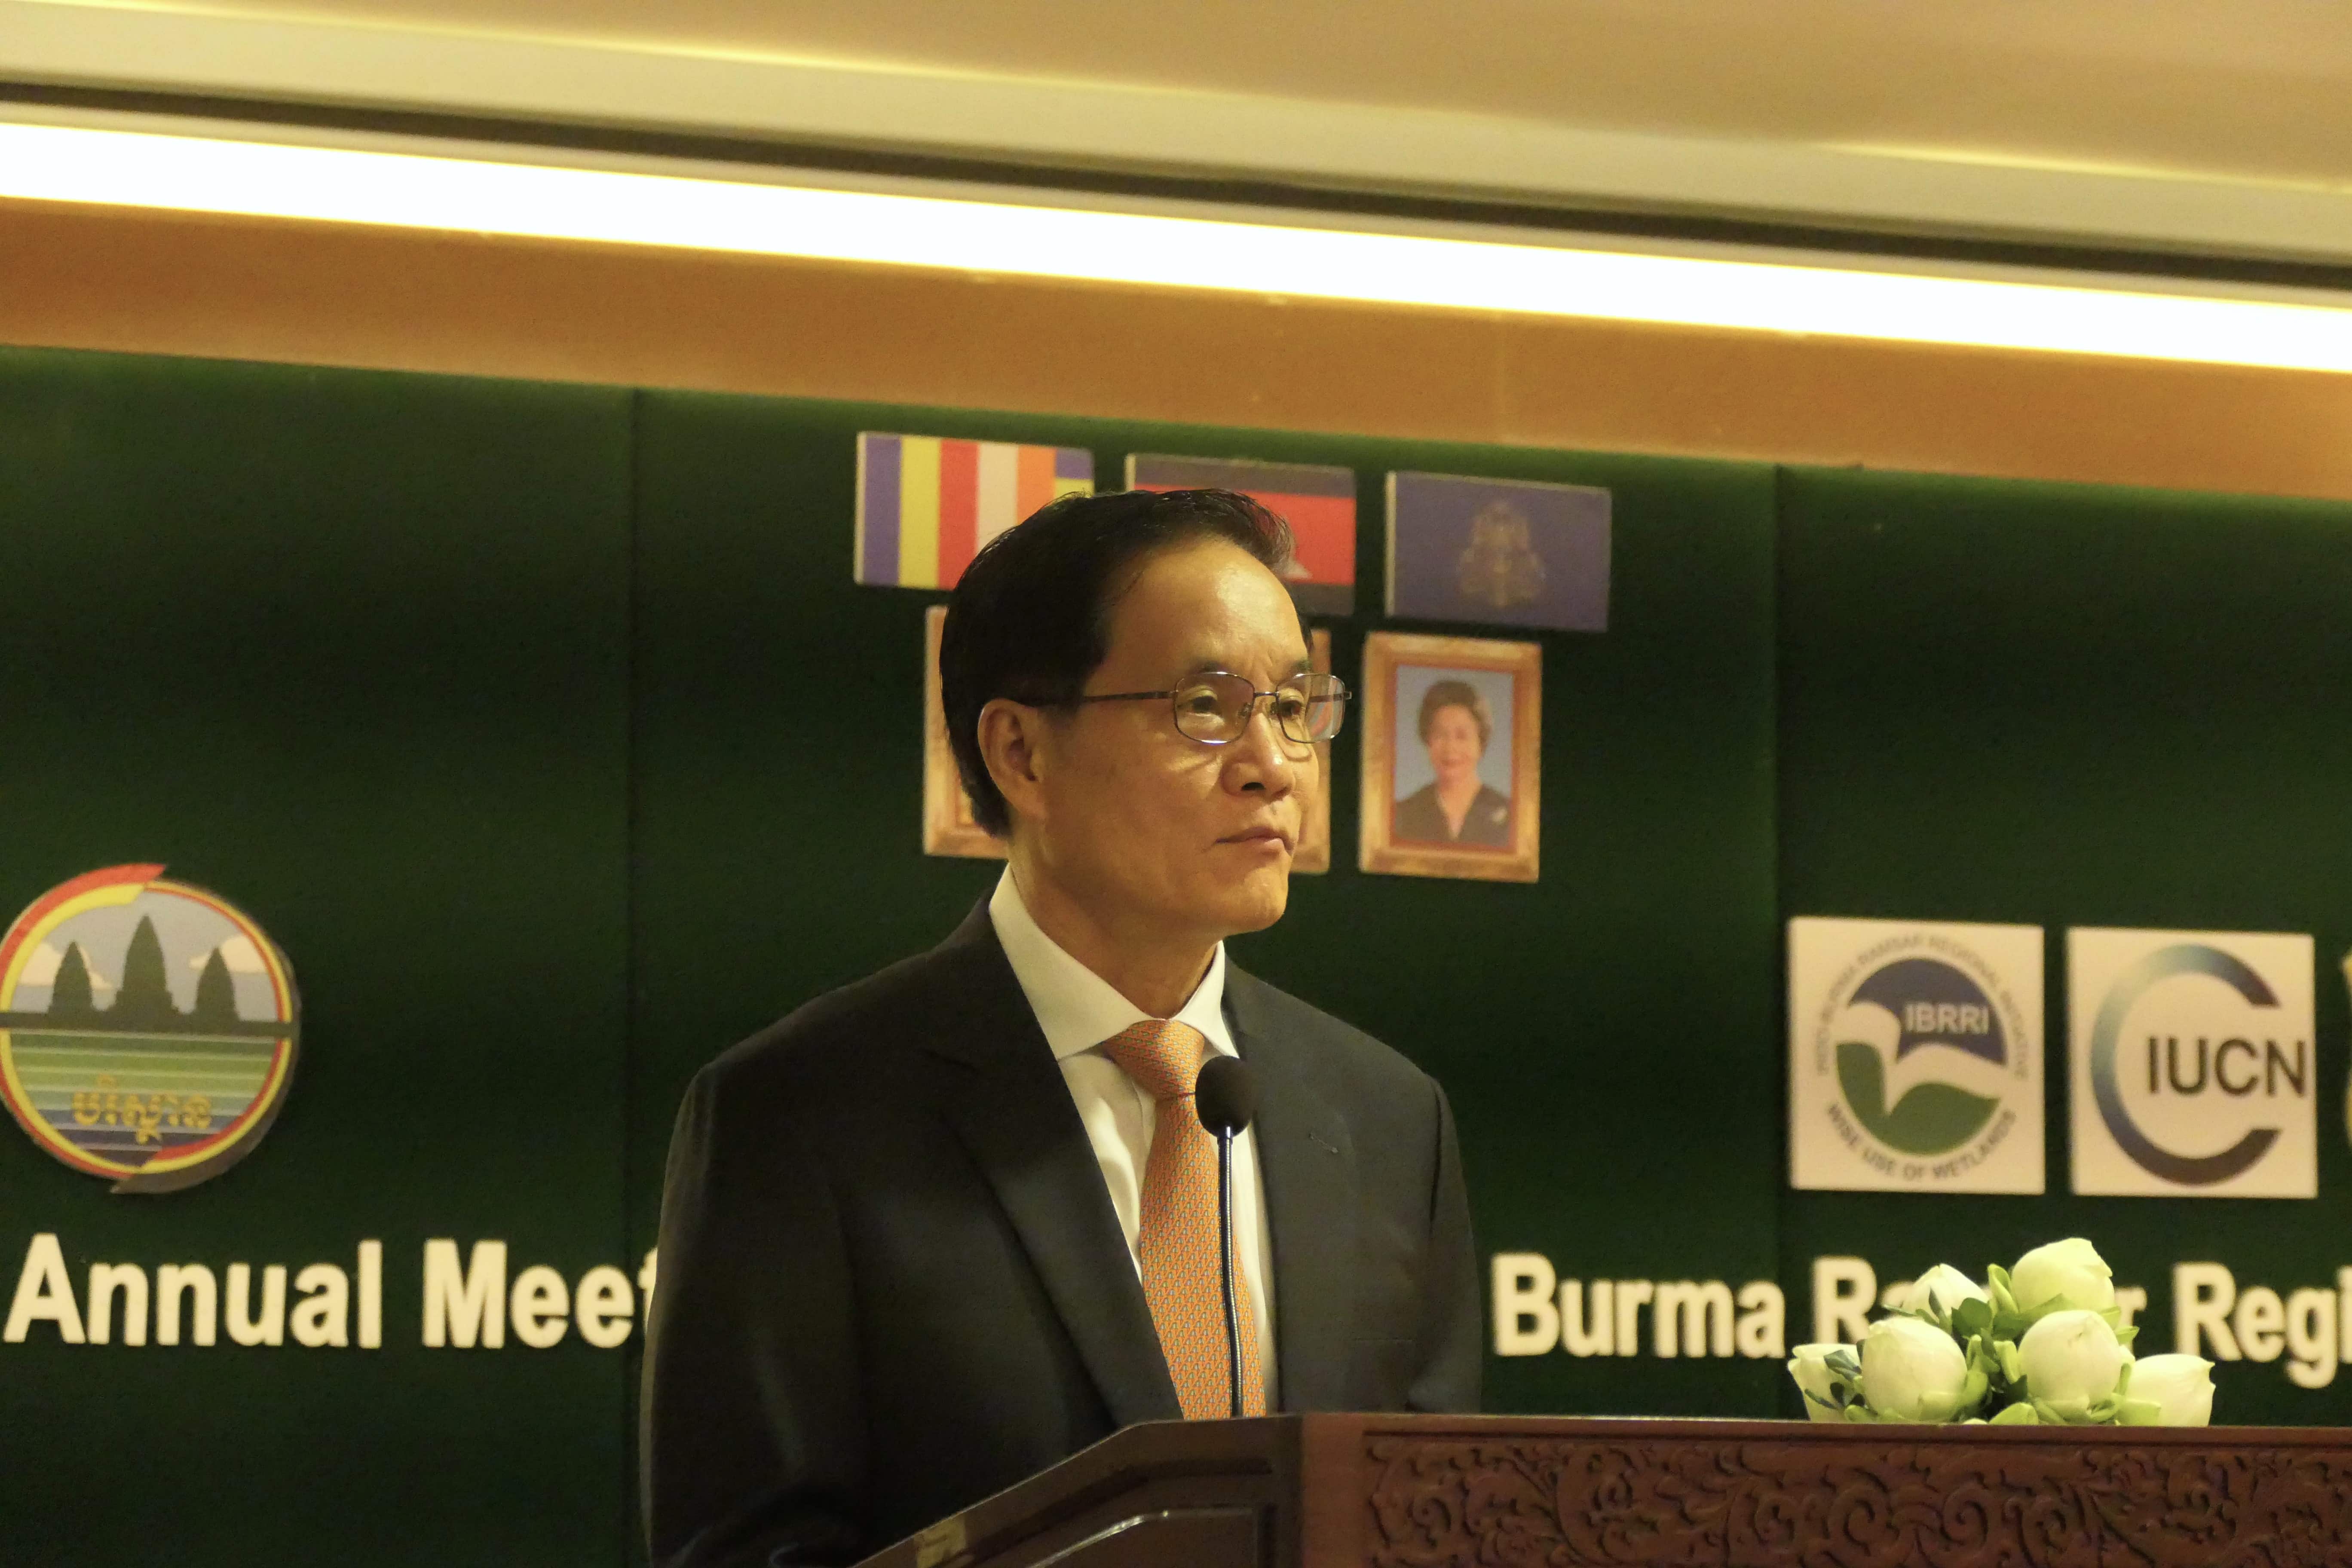 Secretary of State, Ministry of Environment, gives opening remarks on a podium